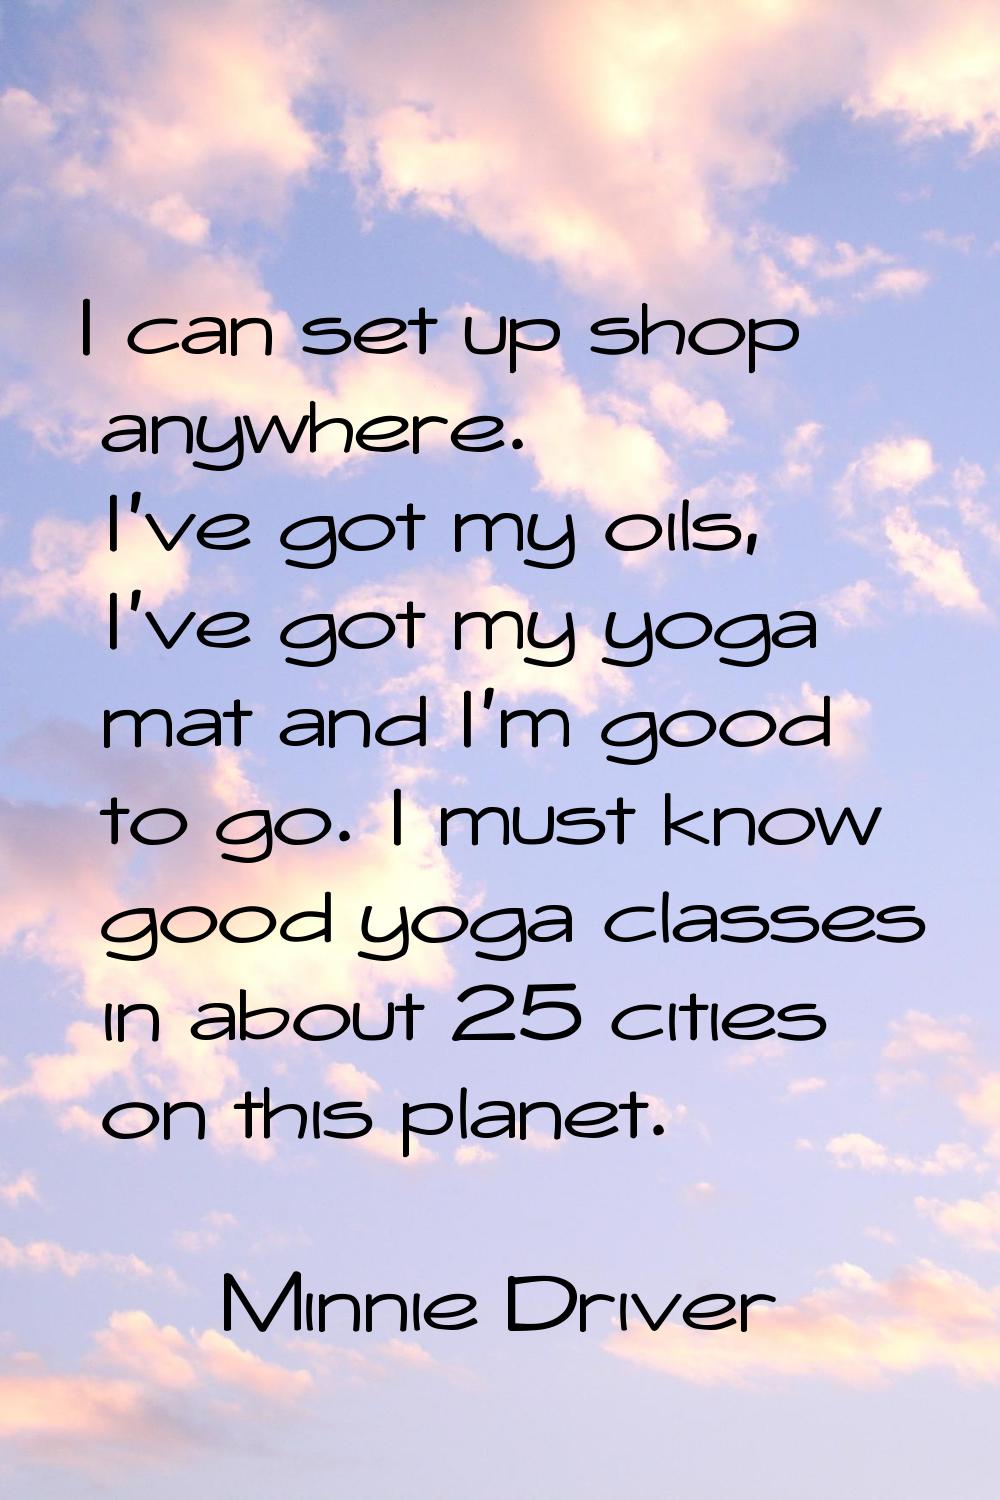 I can set up shop anywhere. I've got my oils, I've got my yoga mat and I'm good to go. I must know 